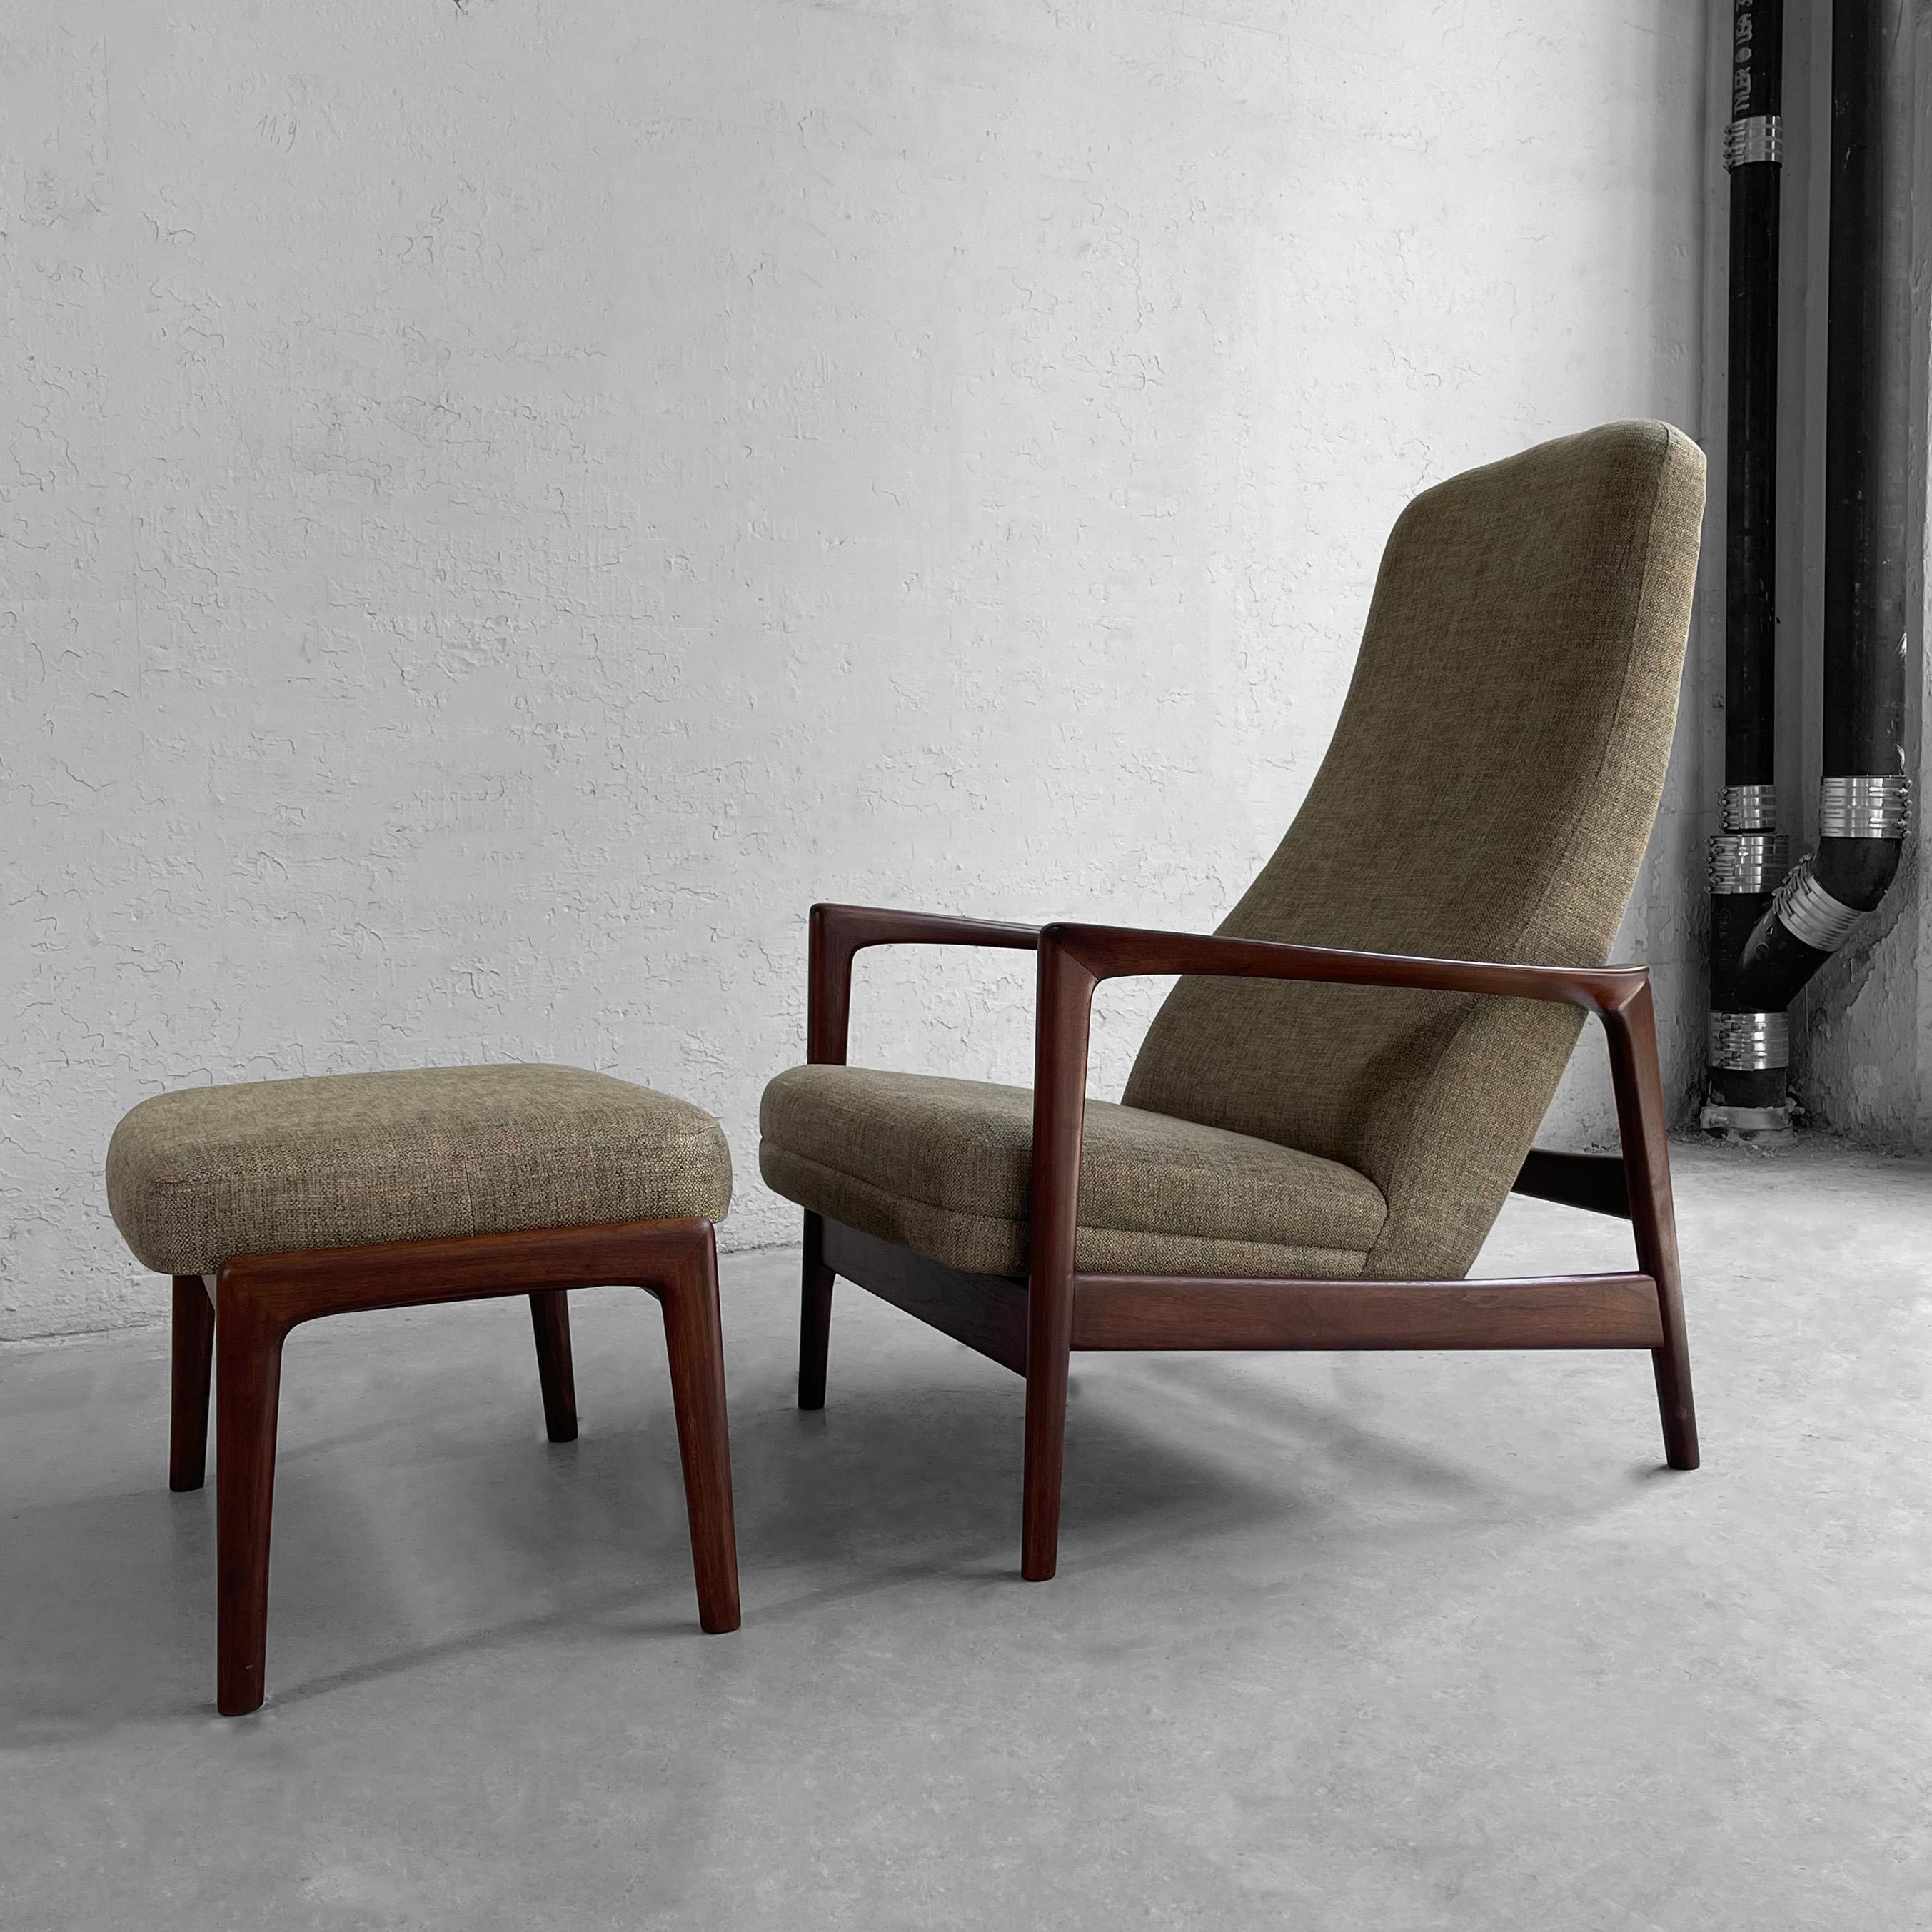 Fabric Recliner Lounge Chair with Ottoman by Folke Ohlsson for DUX